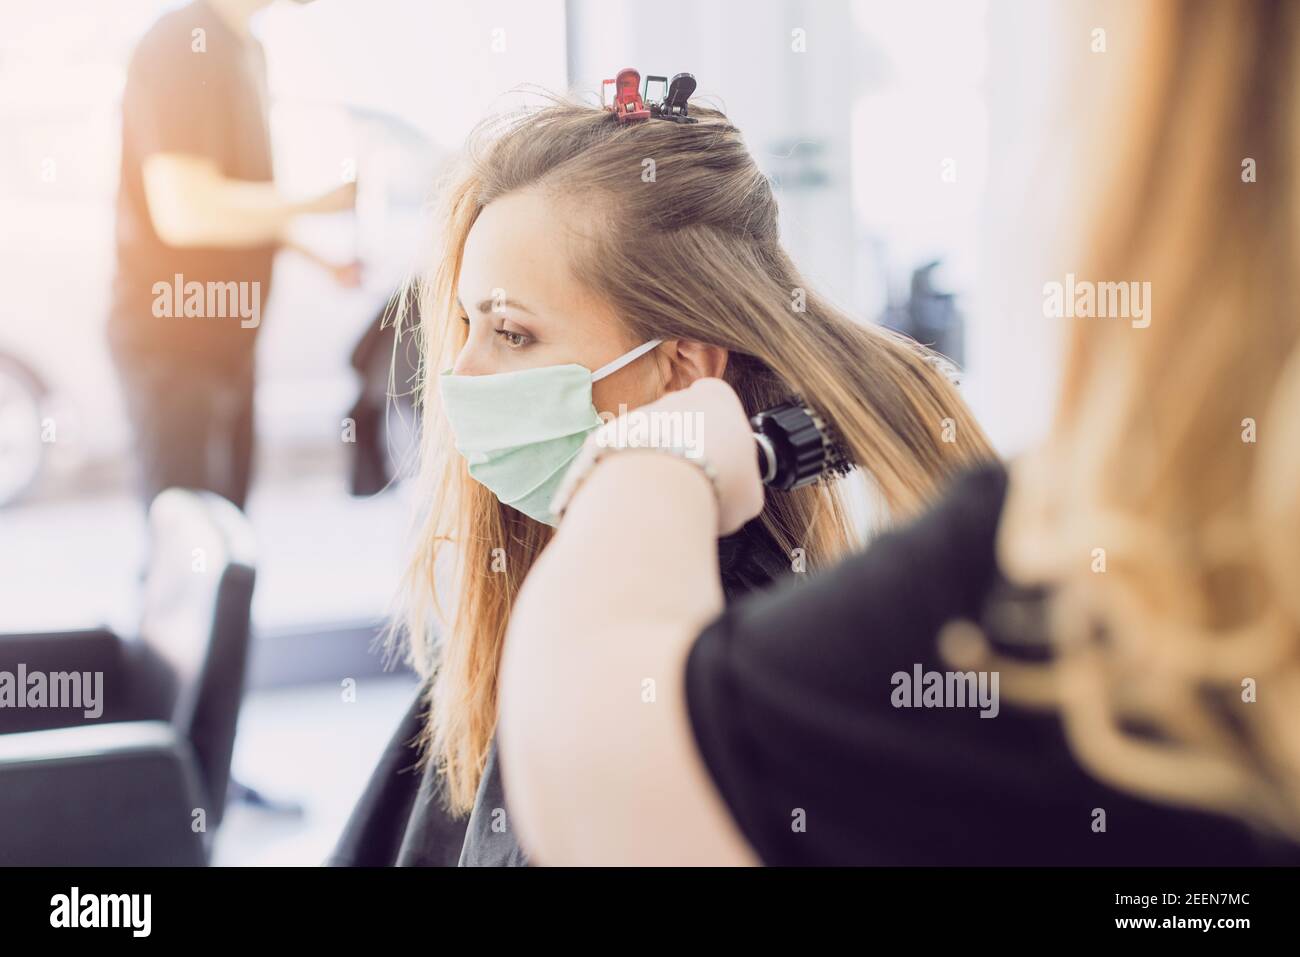 Woman visiting the hairdresser wearing face mask Stock Photo